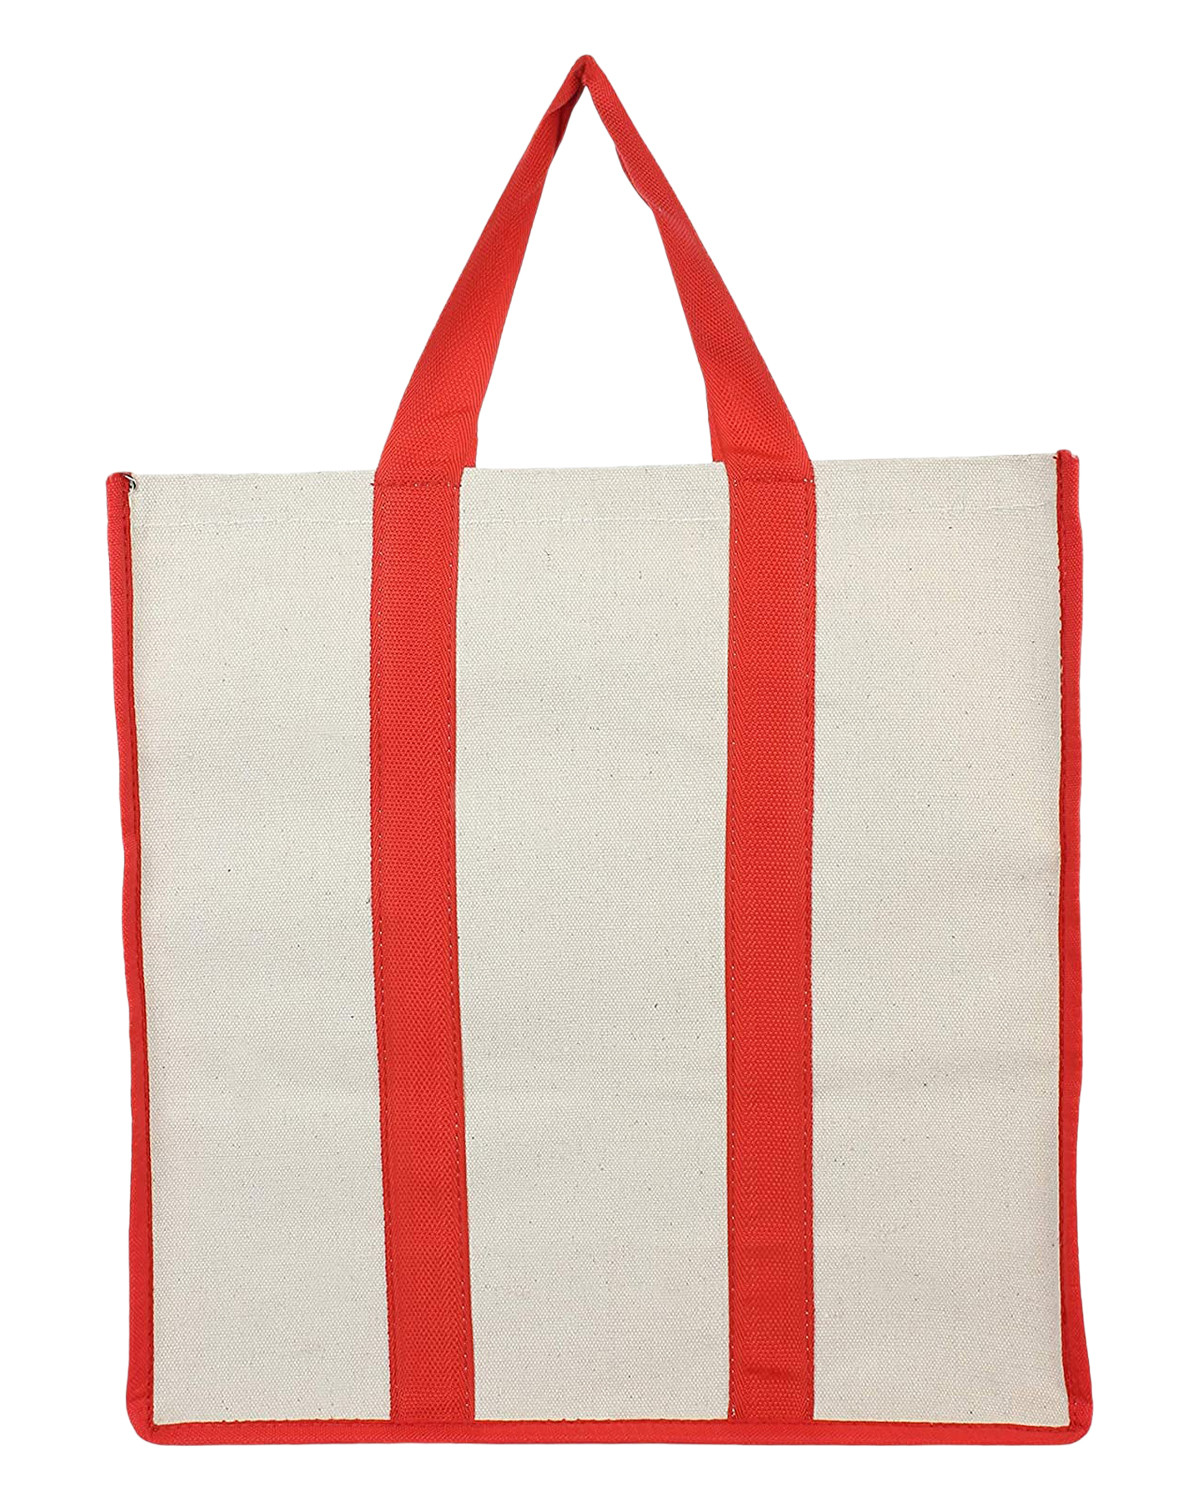 Kuber Industries Canvas Shopping Bags/Grocery Bag for Carry Grocery, Fruits, Vegetable with Handles (Red) 54KM4015